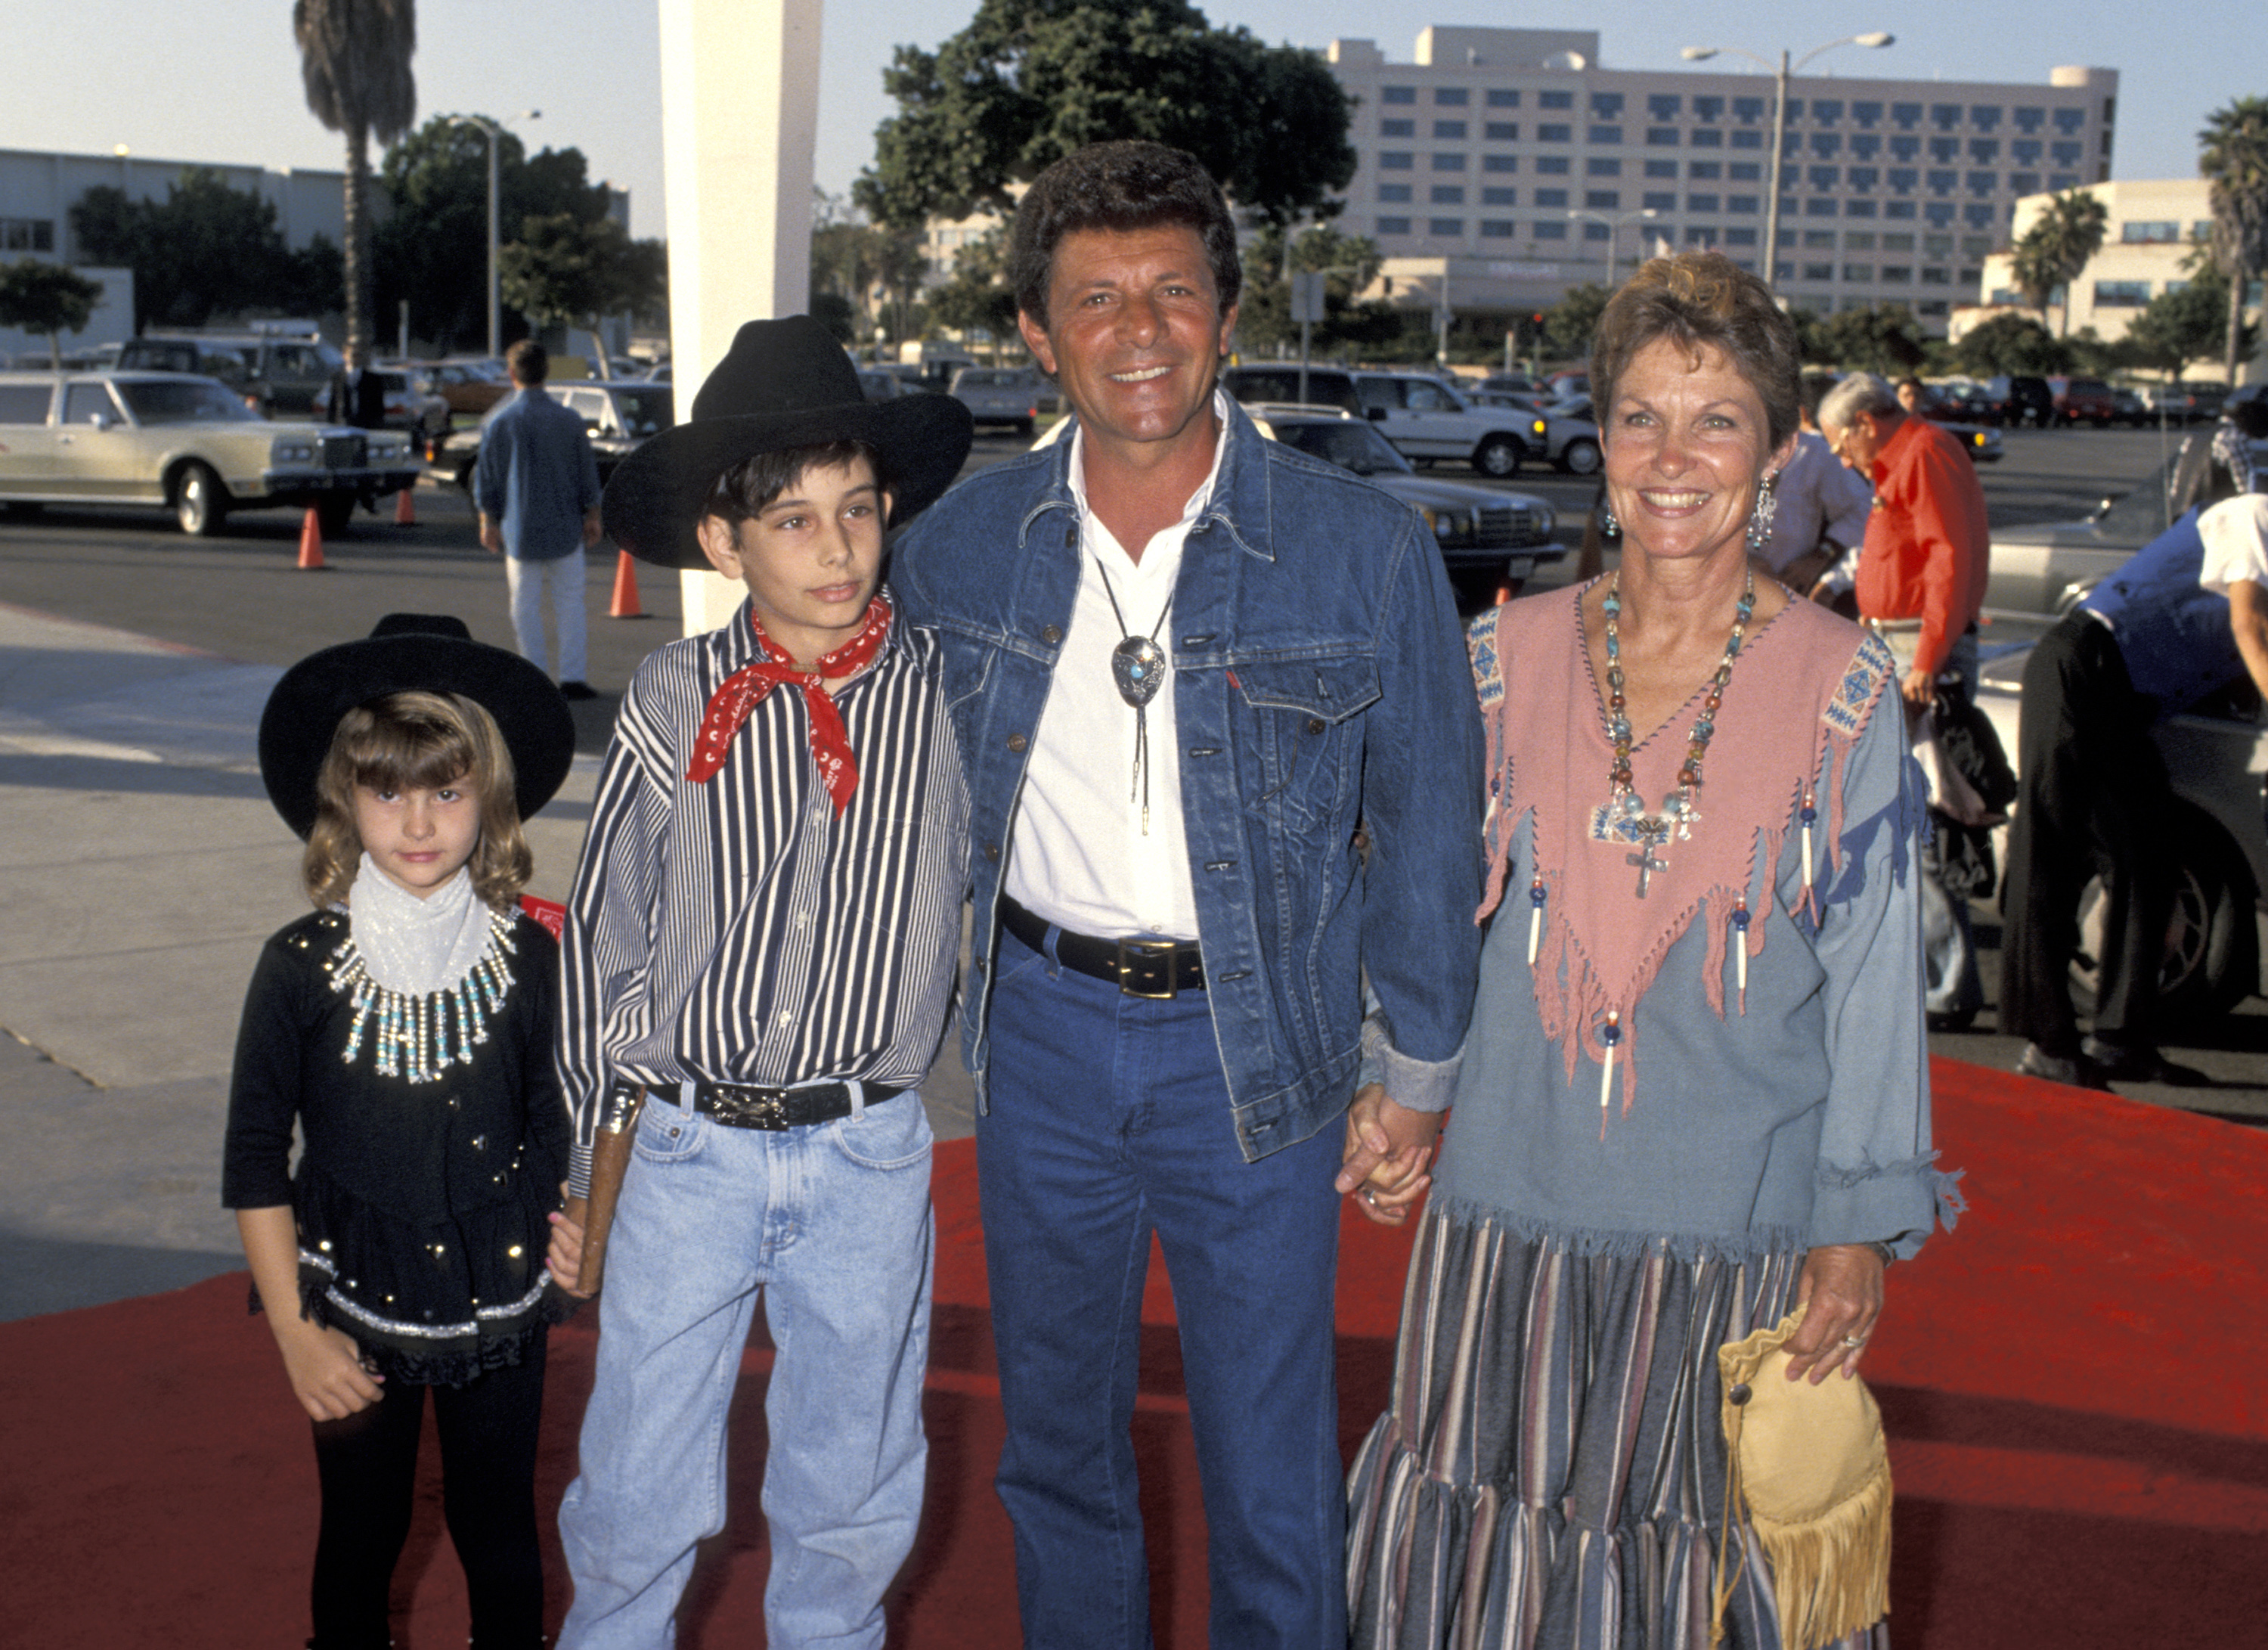 Frankie Avalon, his wife, Kay, and two of his children at the SHARE "40 Years of SHARE" Celebration at Santa Monica Civic Auditorium | Source: Getty Images